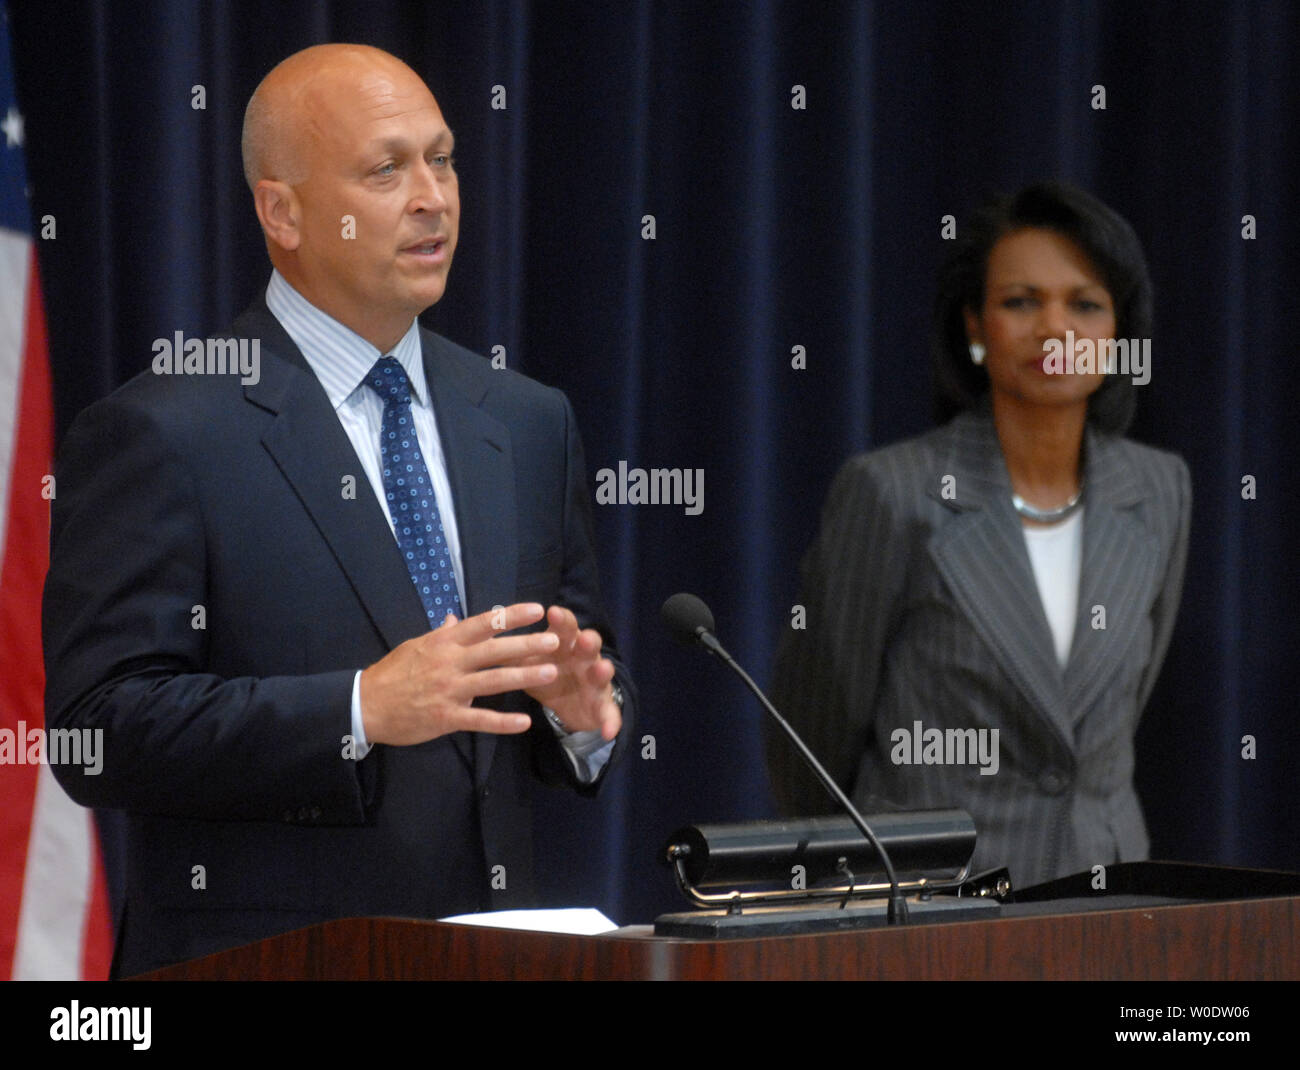 Baseball Hall of Famer Cal Ripken Jr. speaks alongside Secretary of State Condoleezza Rice after Ripken was announced as a special sports envoy to the State Department during a ceremony at the State Department in Washington on August 13, 2007. (UPI Photo/Kevin Dietsch) Stock Photo